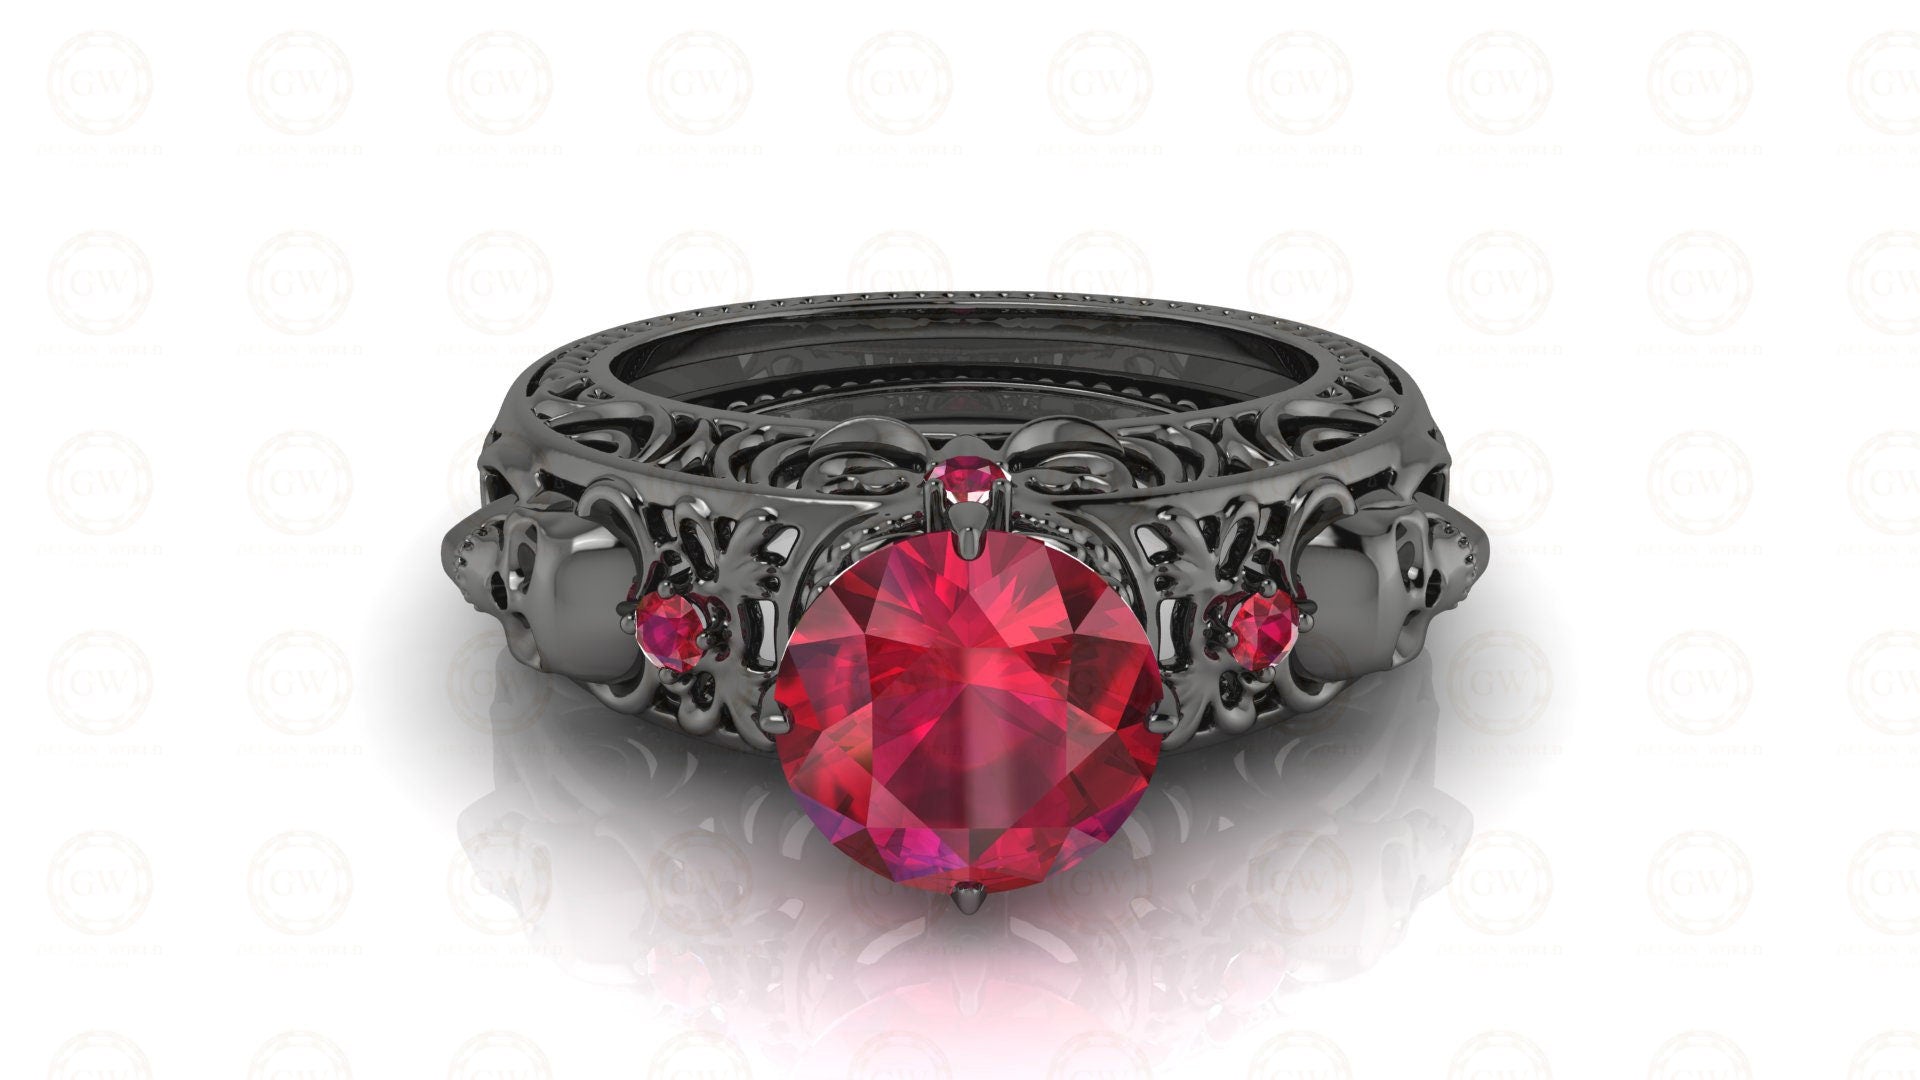 2 Ct Unique Gothic Skull Round Floral Vintage Engagement Ring, Birthstone July Ruby gemstone ring, CZ Women Wedding ring, Sterling Silver